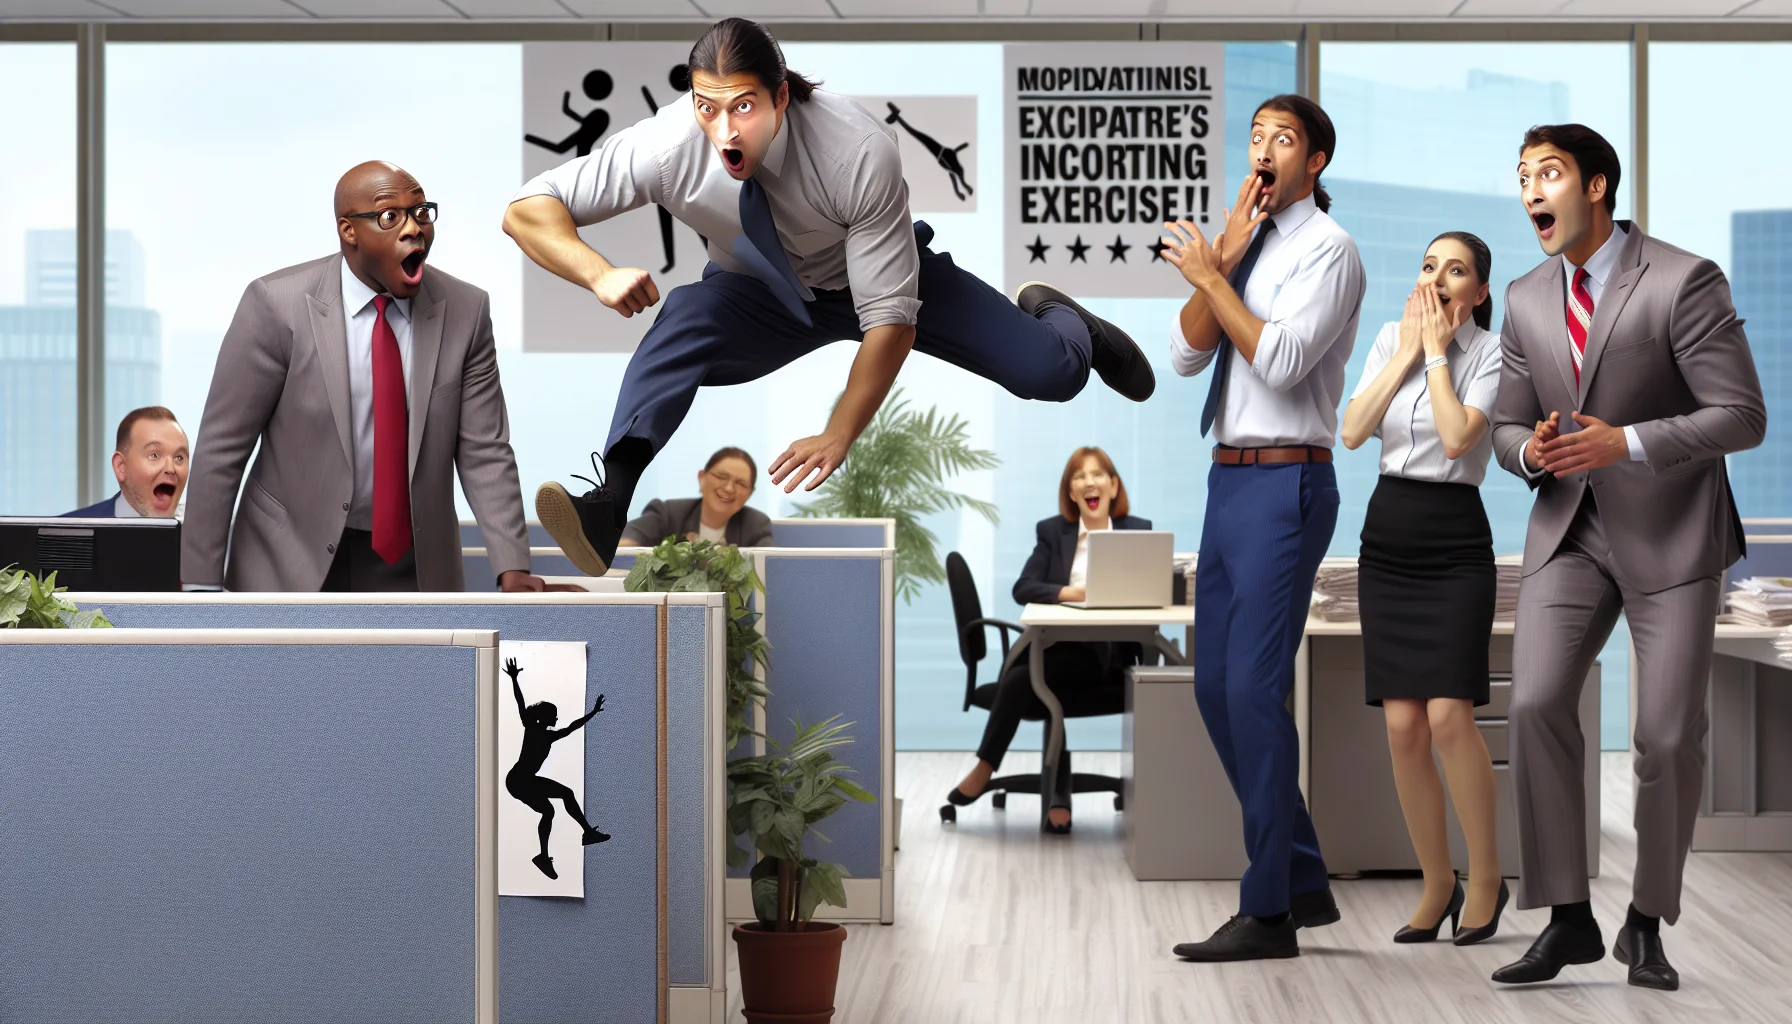 Generate a detailed and vibrant image showing an unexpected situation in a corporate office setting. A male South Asian employee, agile and fit, is practising parkour by vaulting over cubicles and skilfully bounding against walls much to the surprise of his co-workers. Among the spectators, a middle-aged Caucasian woman, her gaping mouth revealing astonishment; a black man chuckling with amusement; and a Hispanic woman, with a bemused expression. They are in work attire. The scene should be light-hearted and humorous, subtly promoting the idea of incorporating exercise into daily life. Minimalistic motivational posters encouraging activity in the background would add to the intended message.